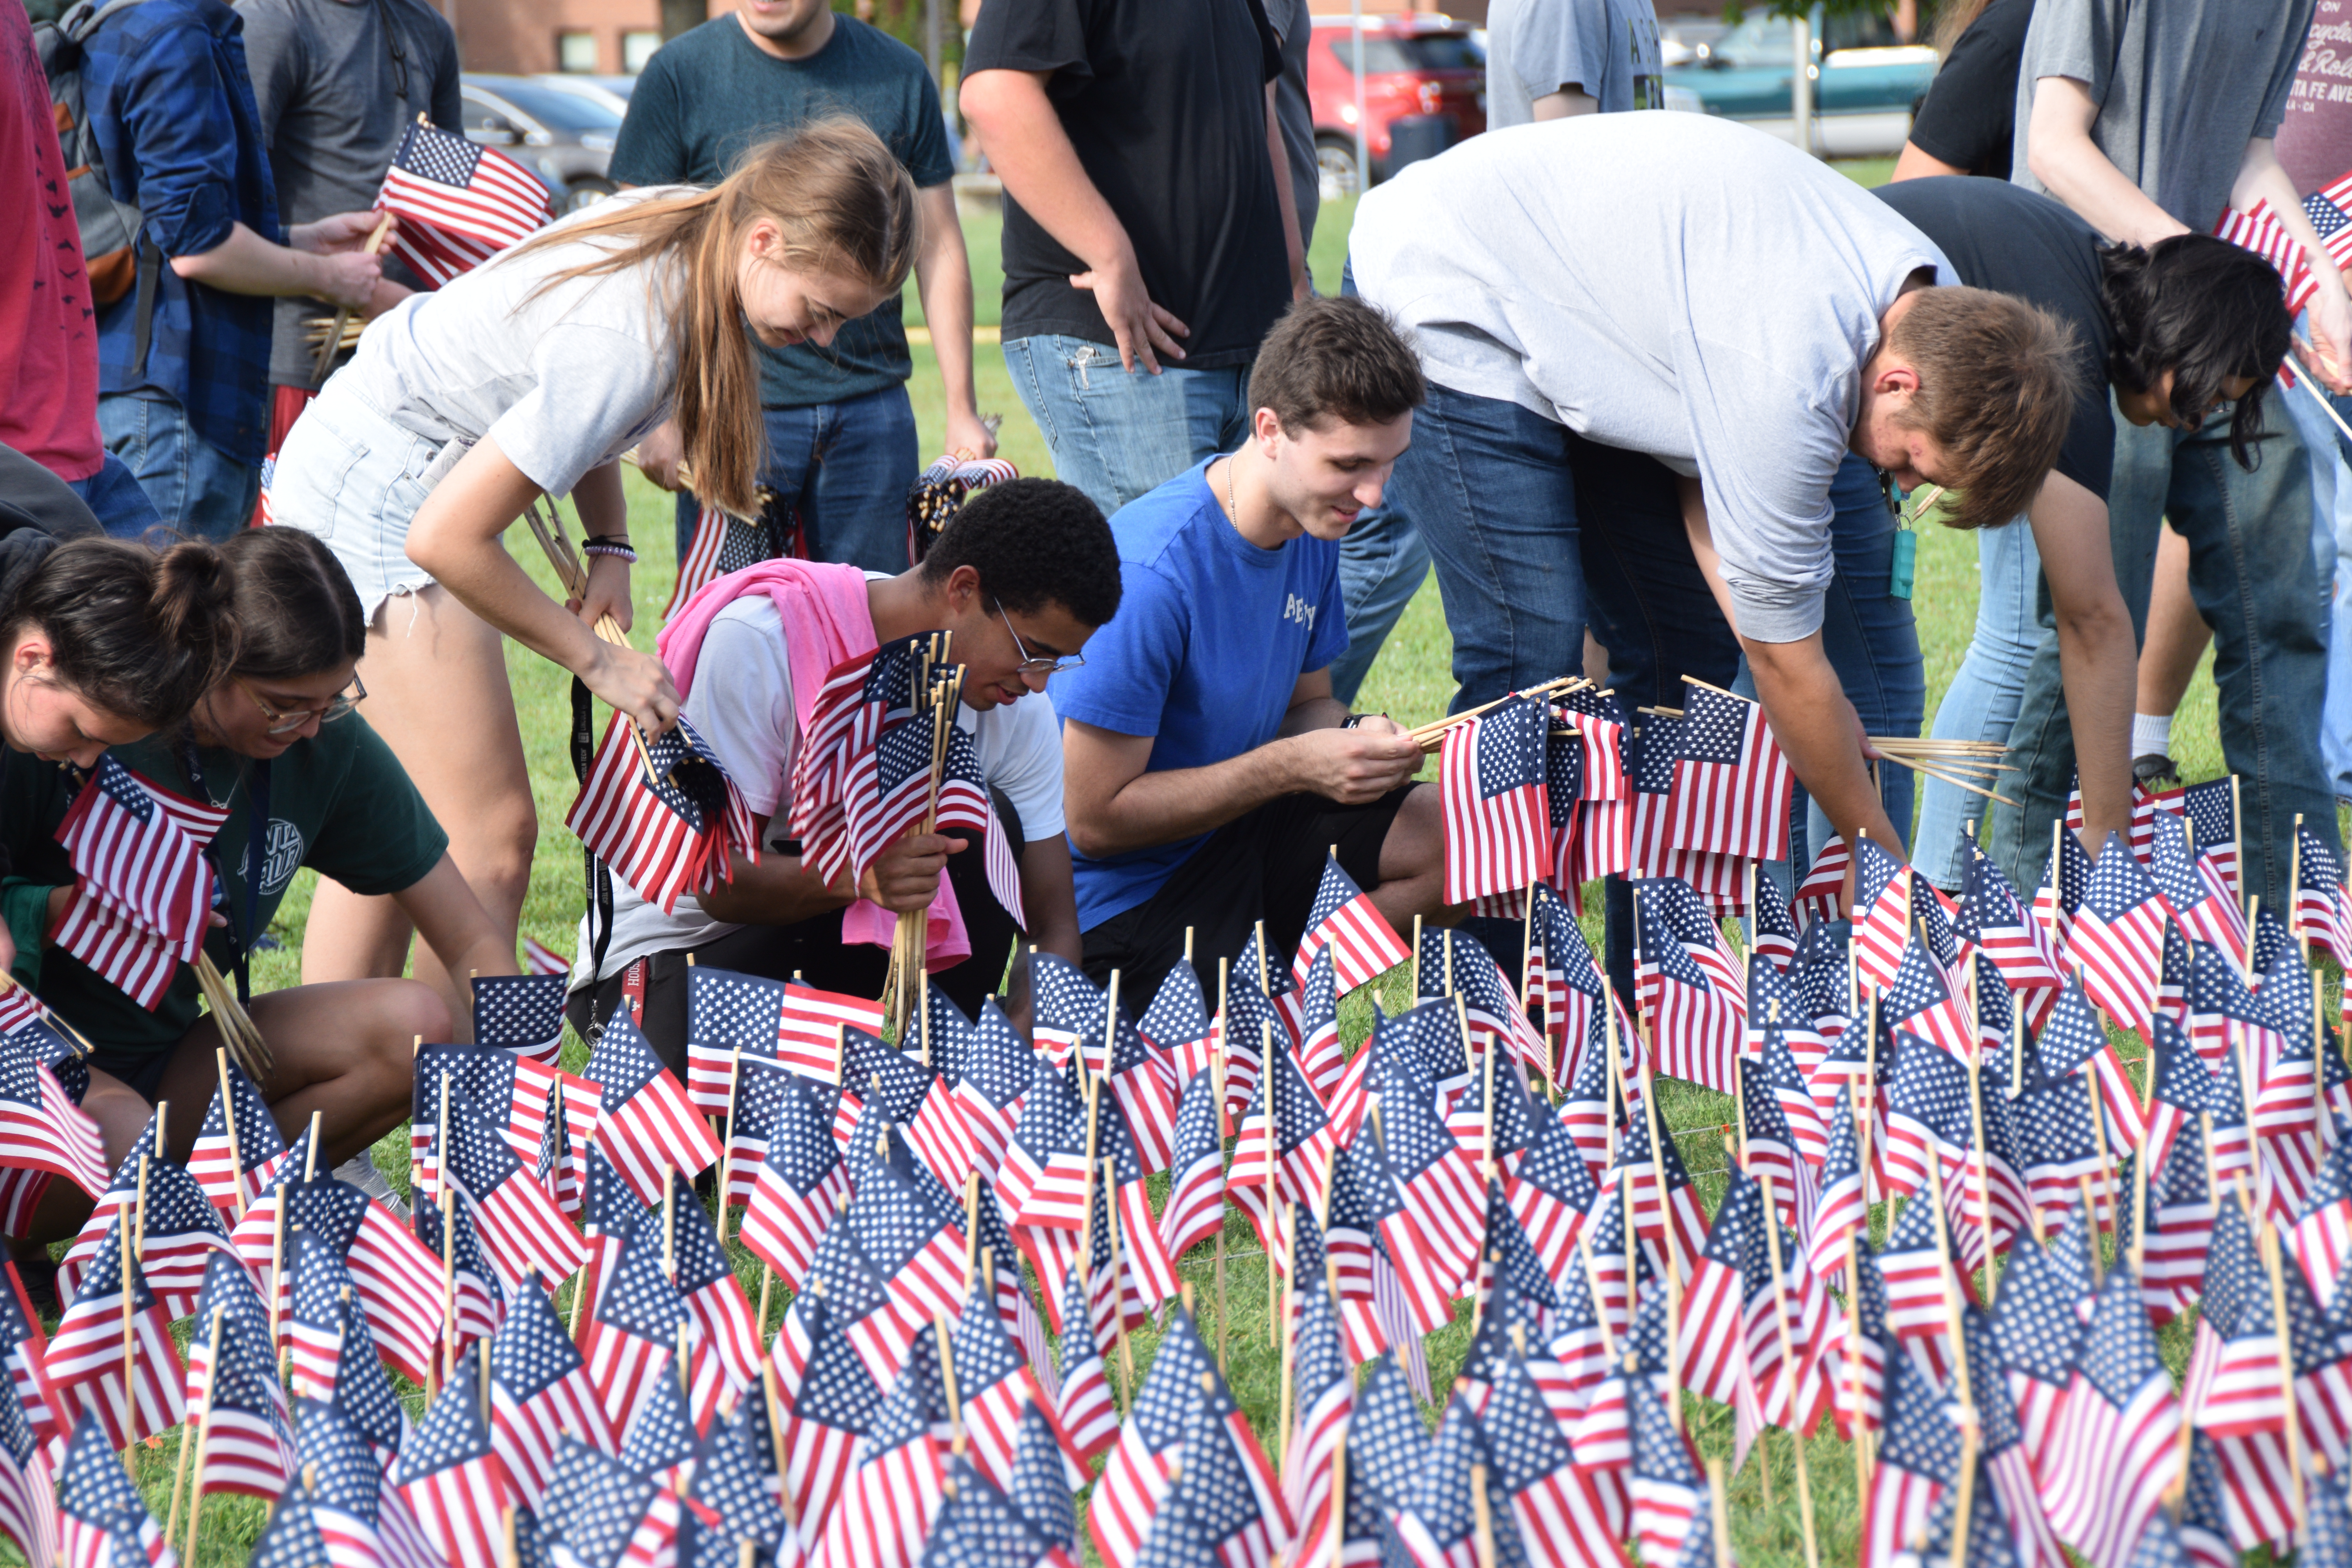 Students placing small American flags in the grass to create a 9/11 flag memorial.